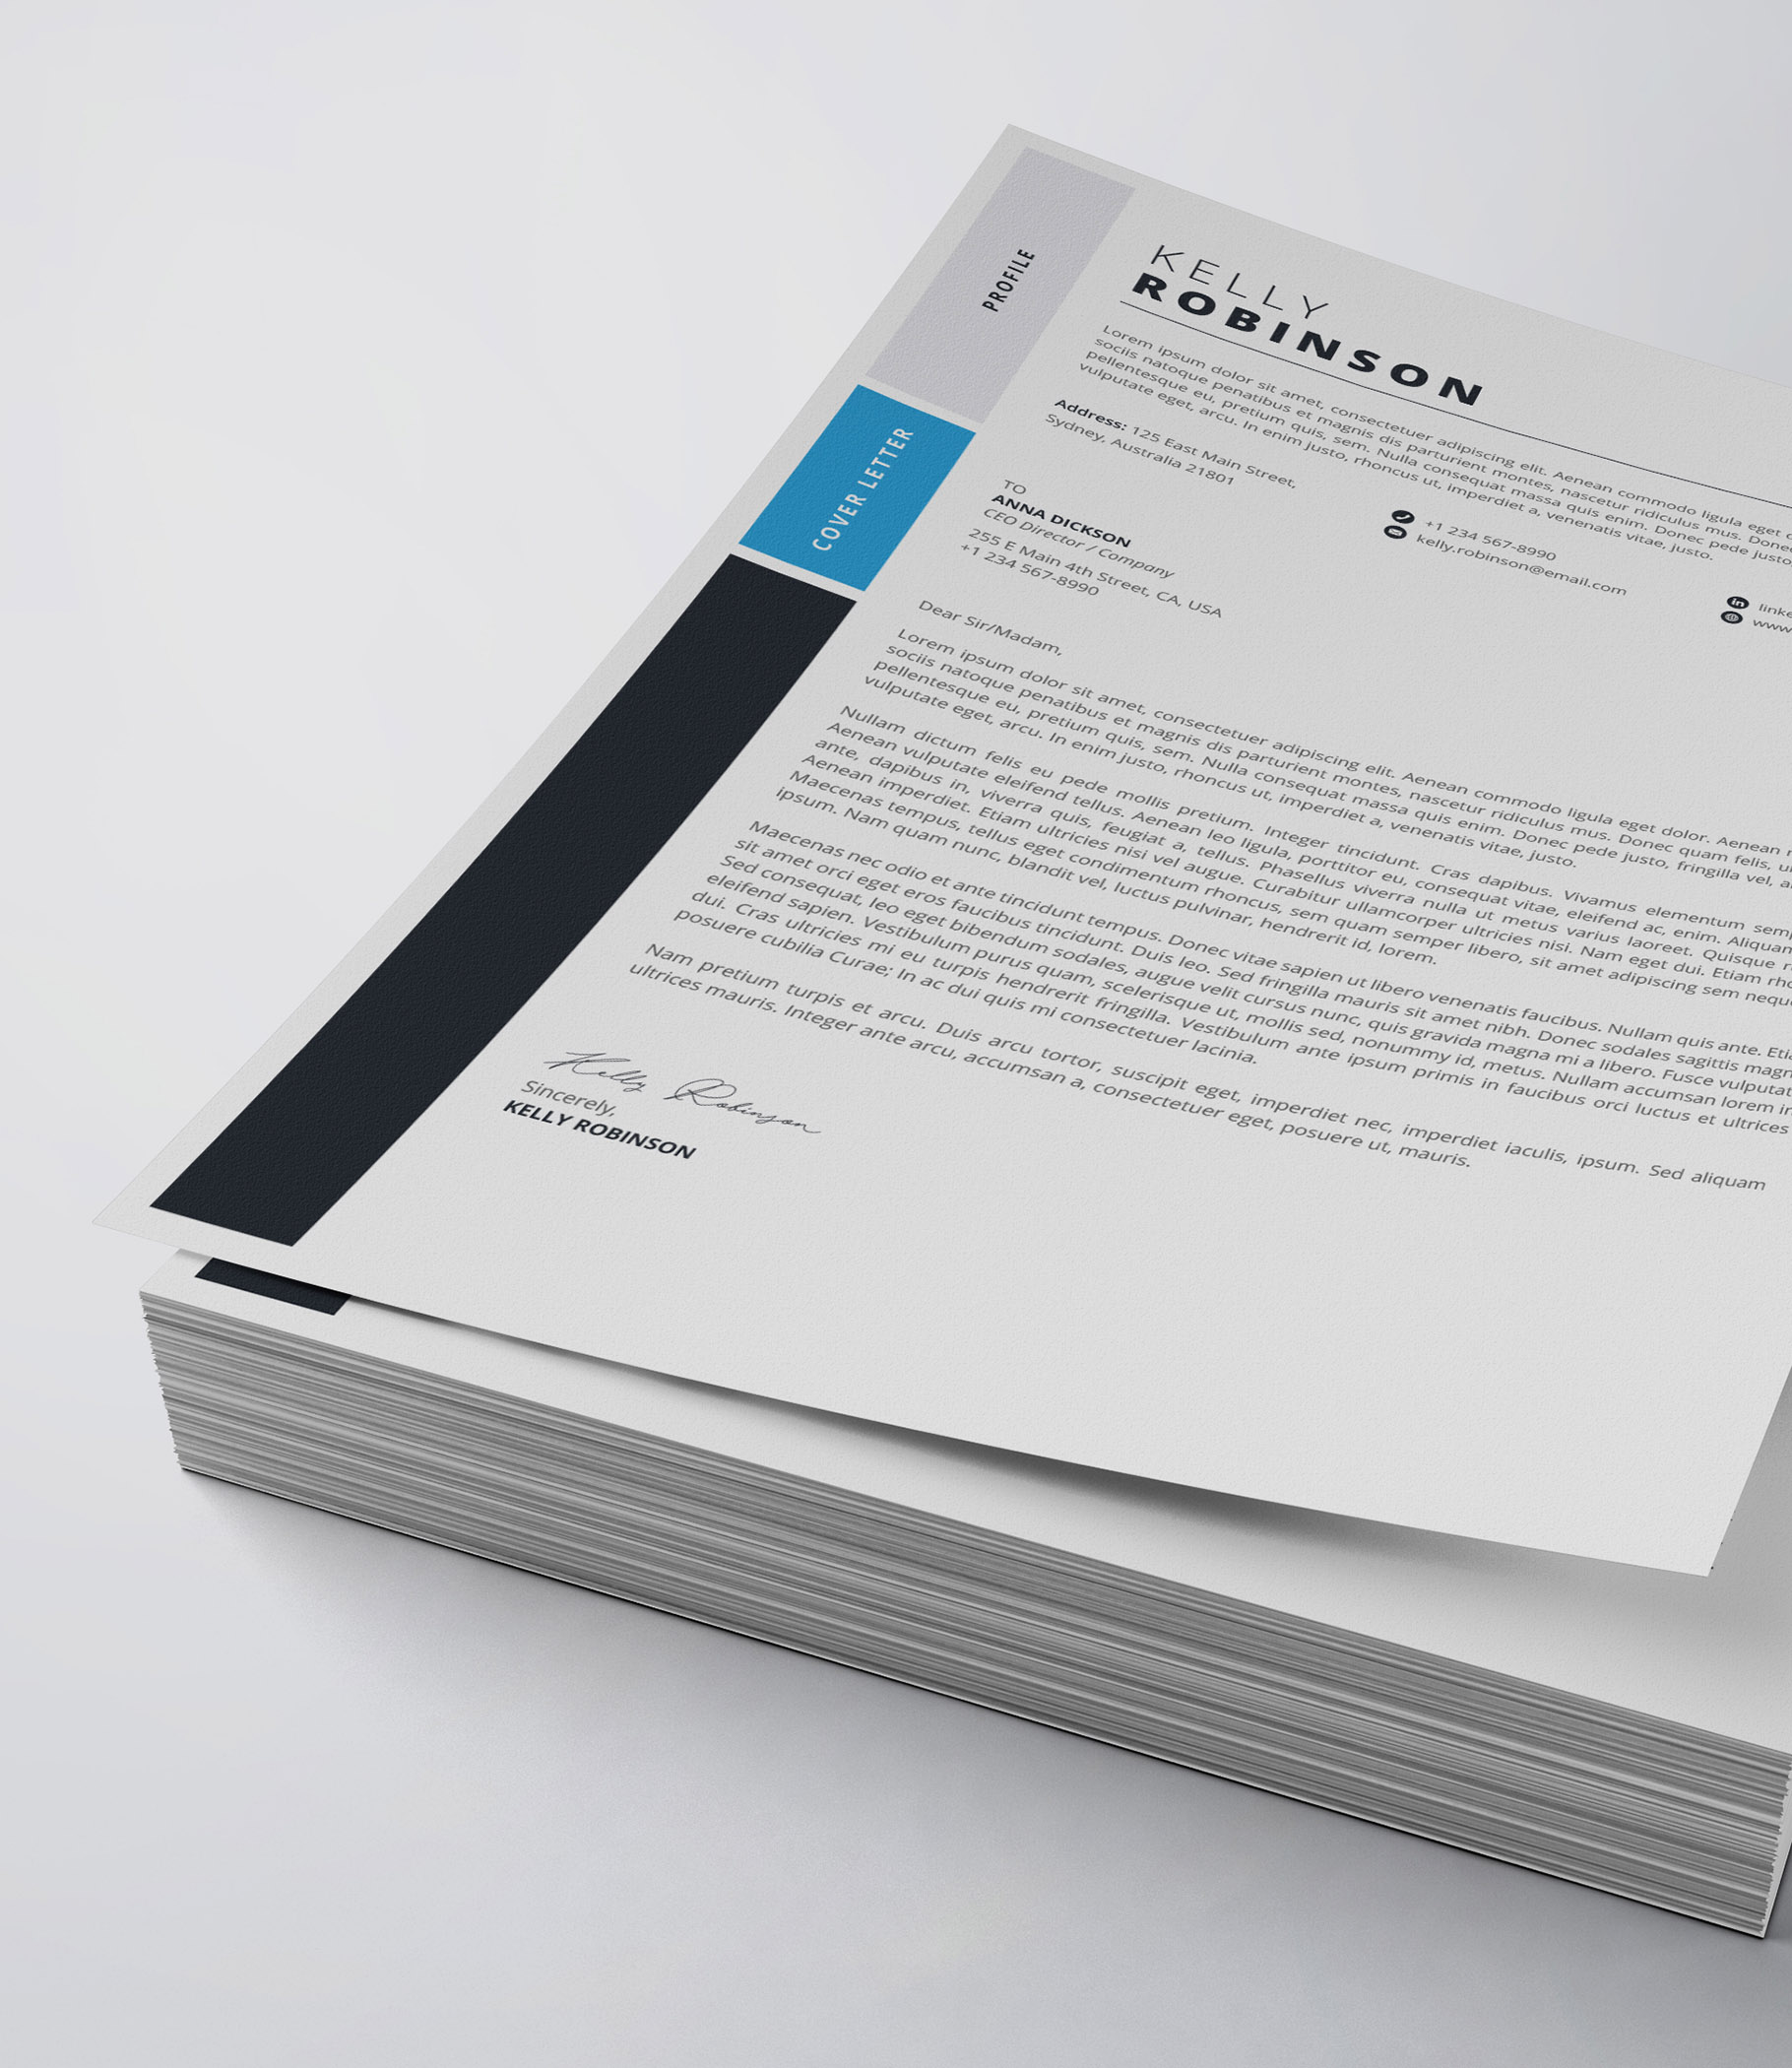 White and blue cover letter on top of a stack of papers.